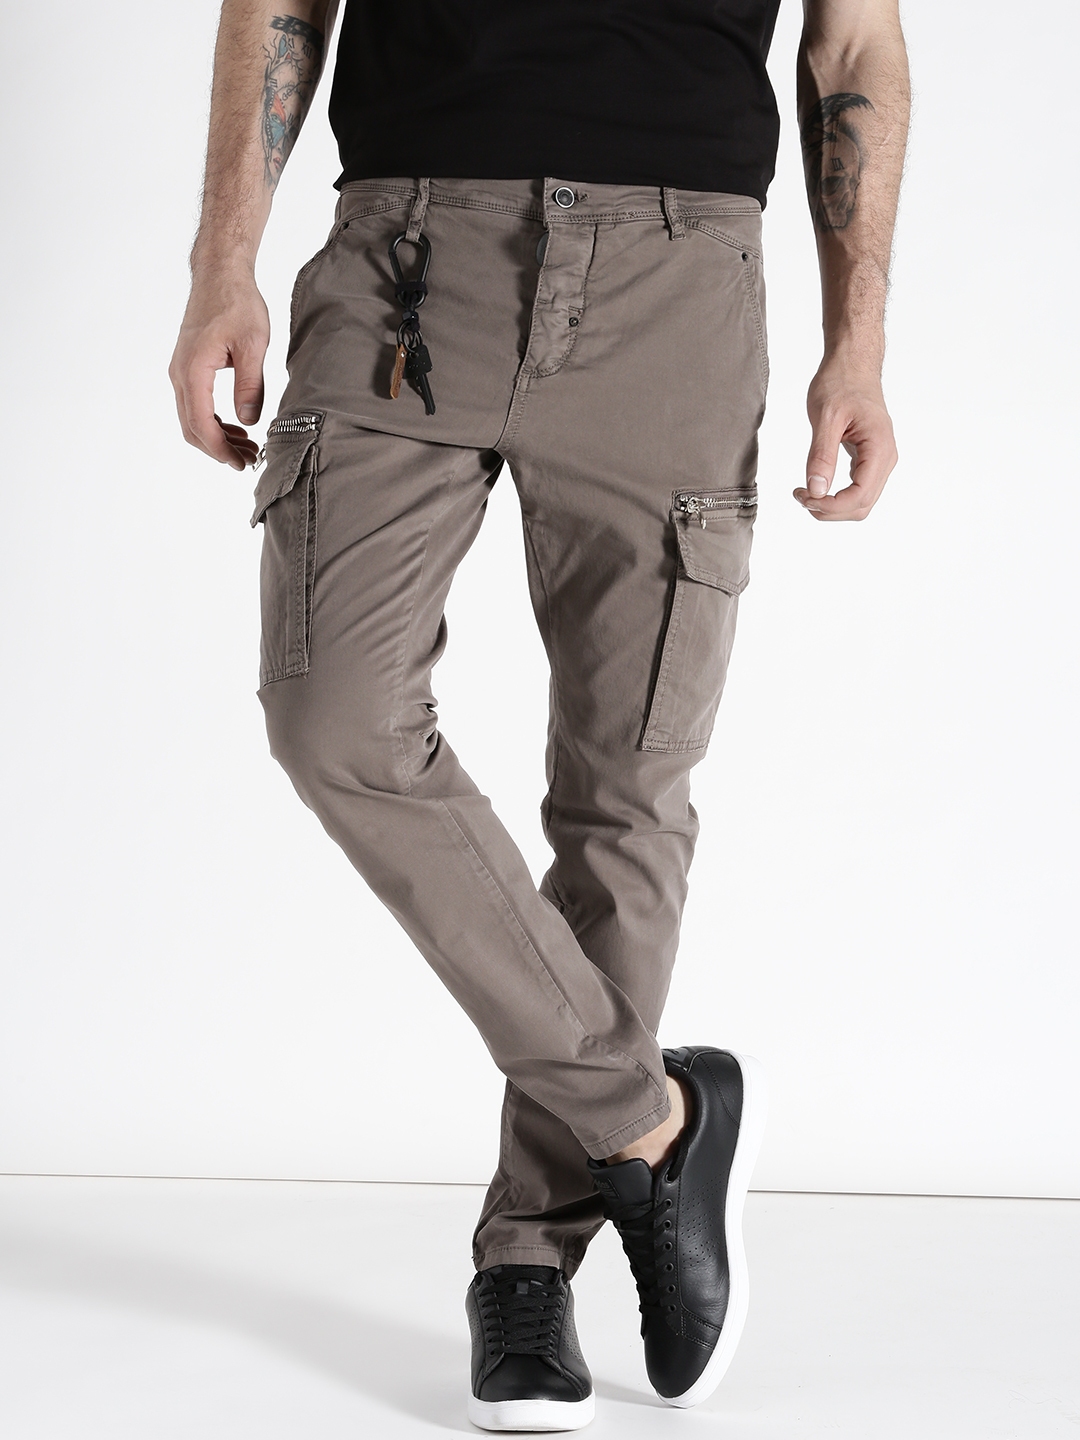 Urban Ranger Men Solid Straight Fit Cream Trousers  Selling Fast at  Pantaloonscom